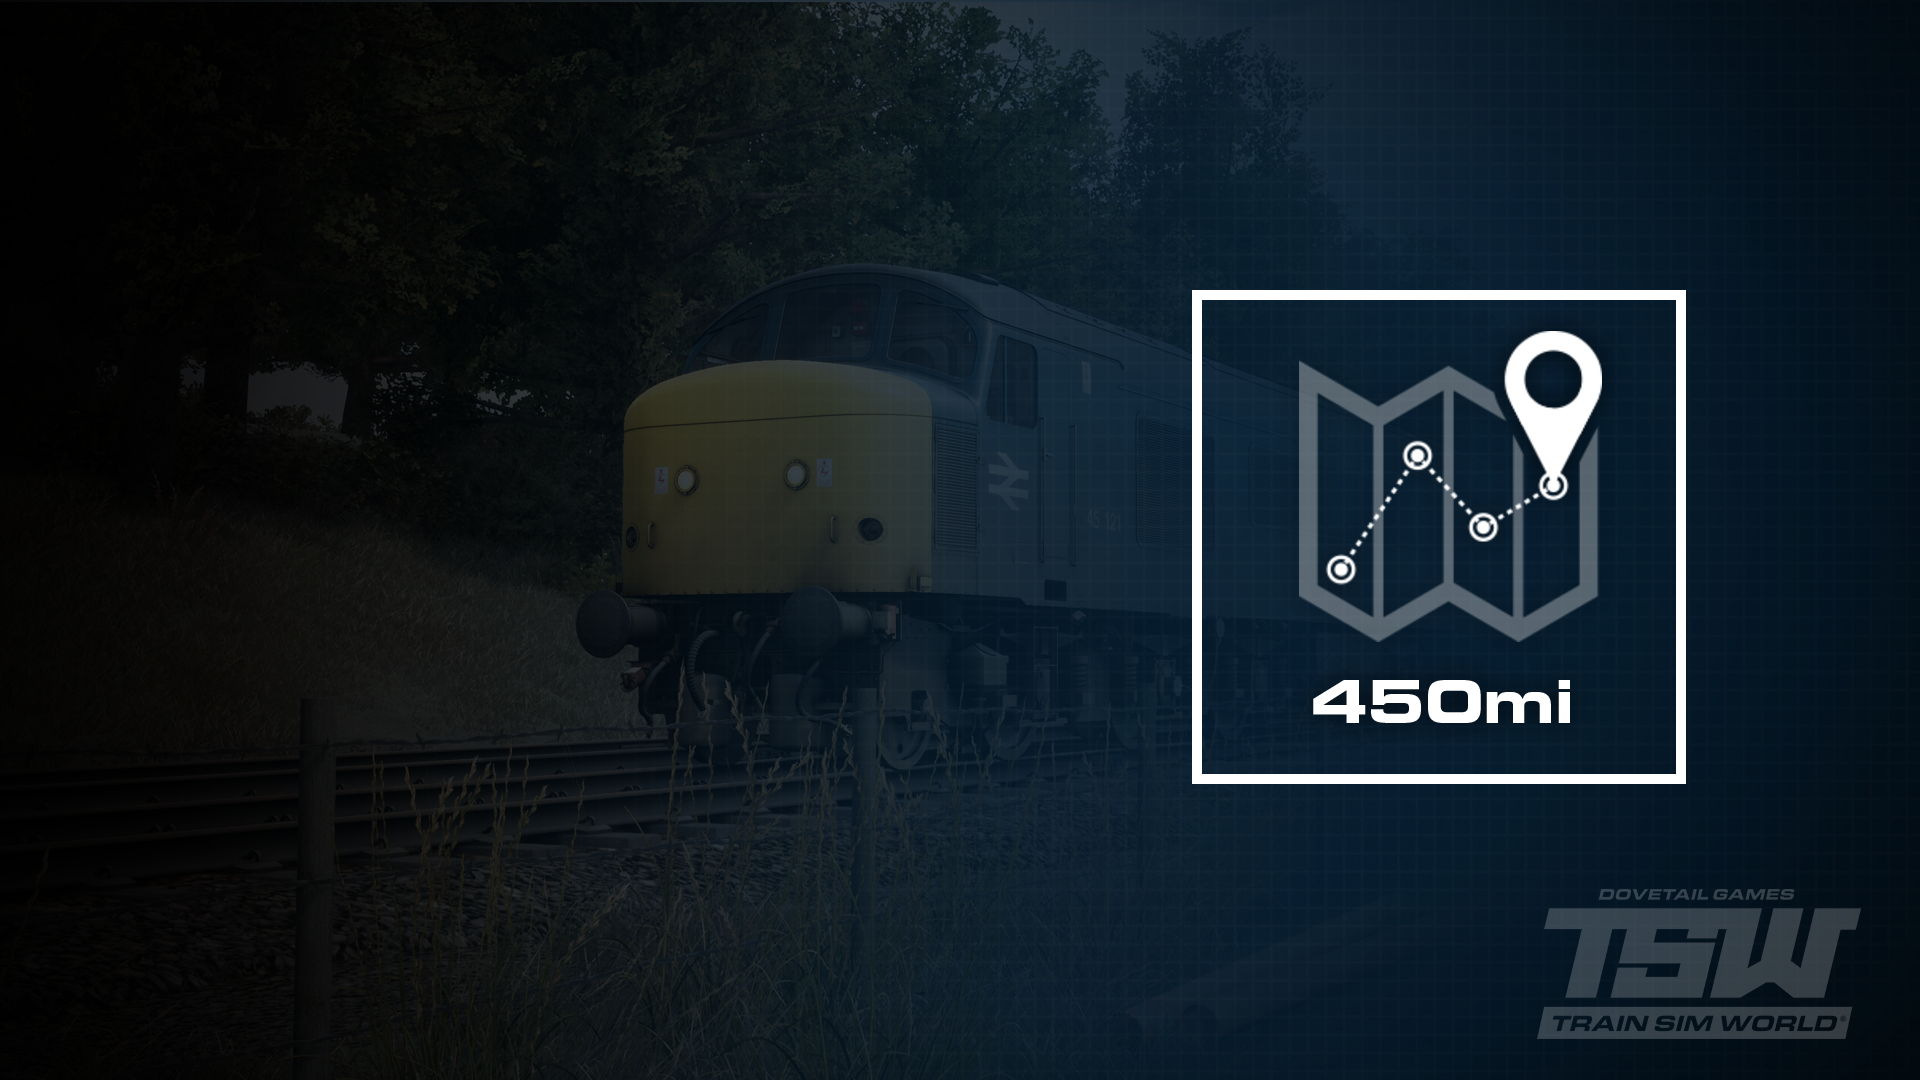 Icon for Class 45: Hit the Peak